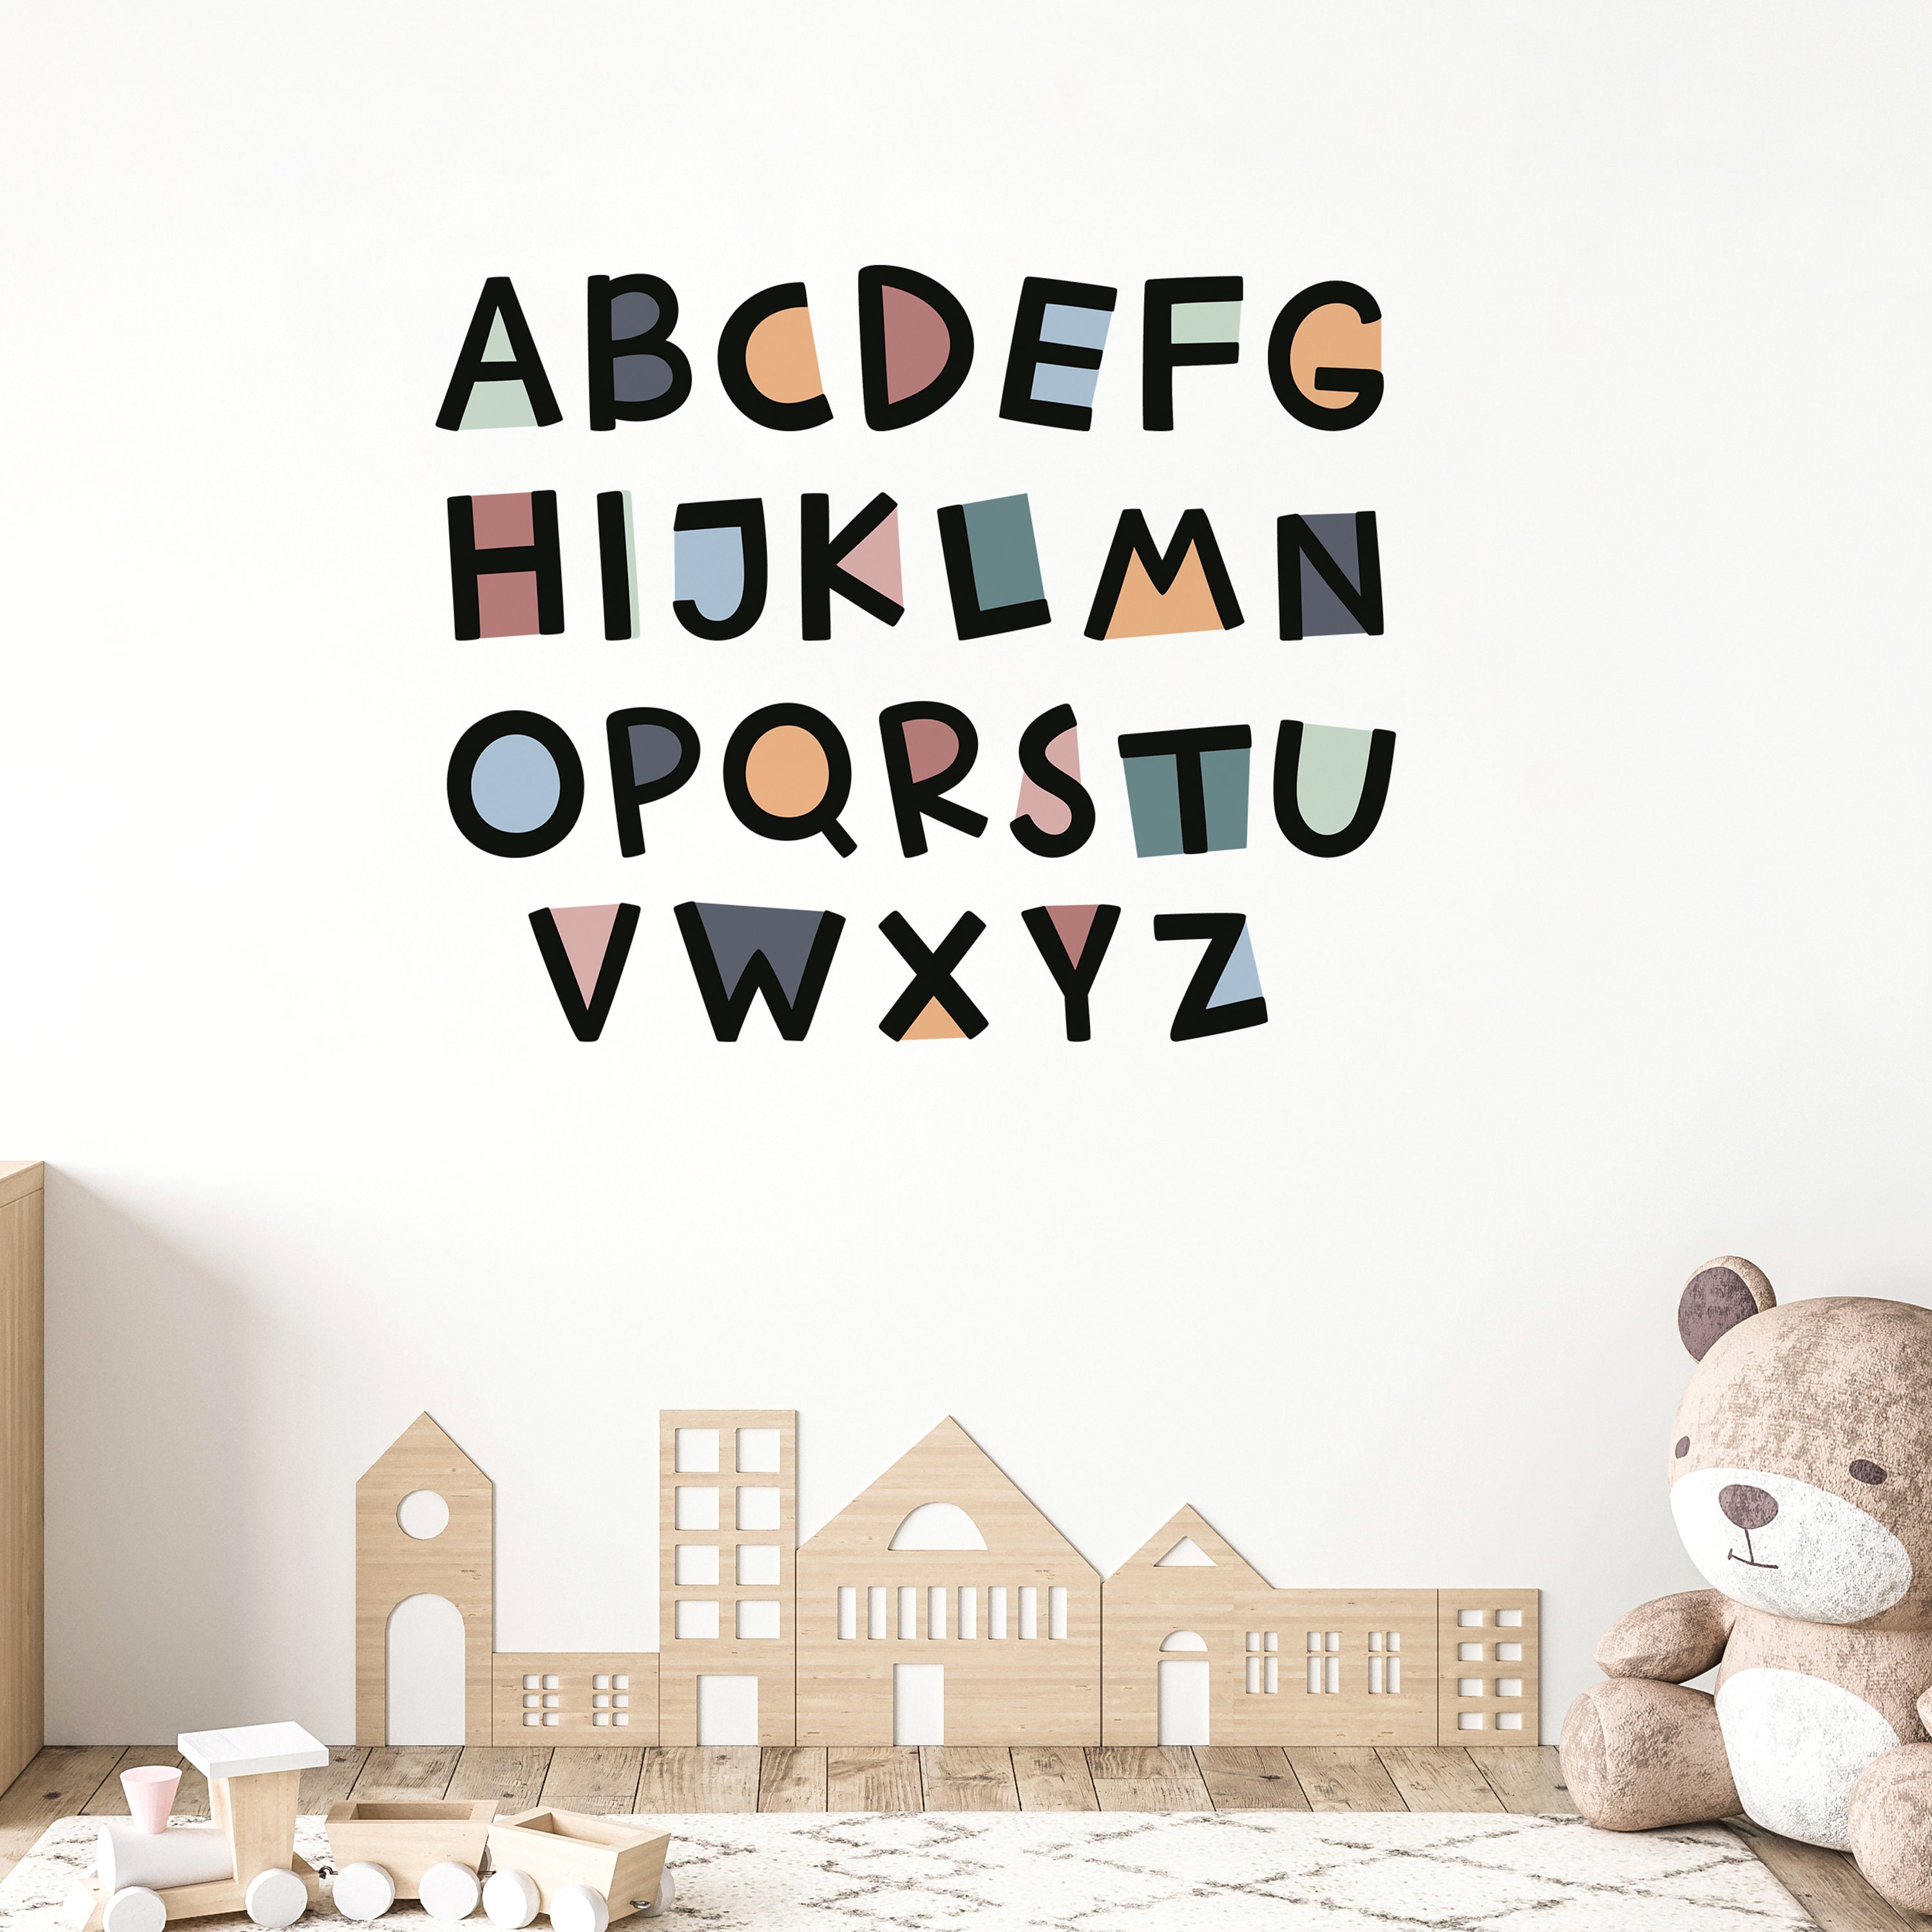 20 Set Vinyl Letter Stickers Self Adhesive Letters Stickers Capital Stick  on Letters Alphabet Stickers Letter Decals for Classroom Decor Sign Craft